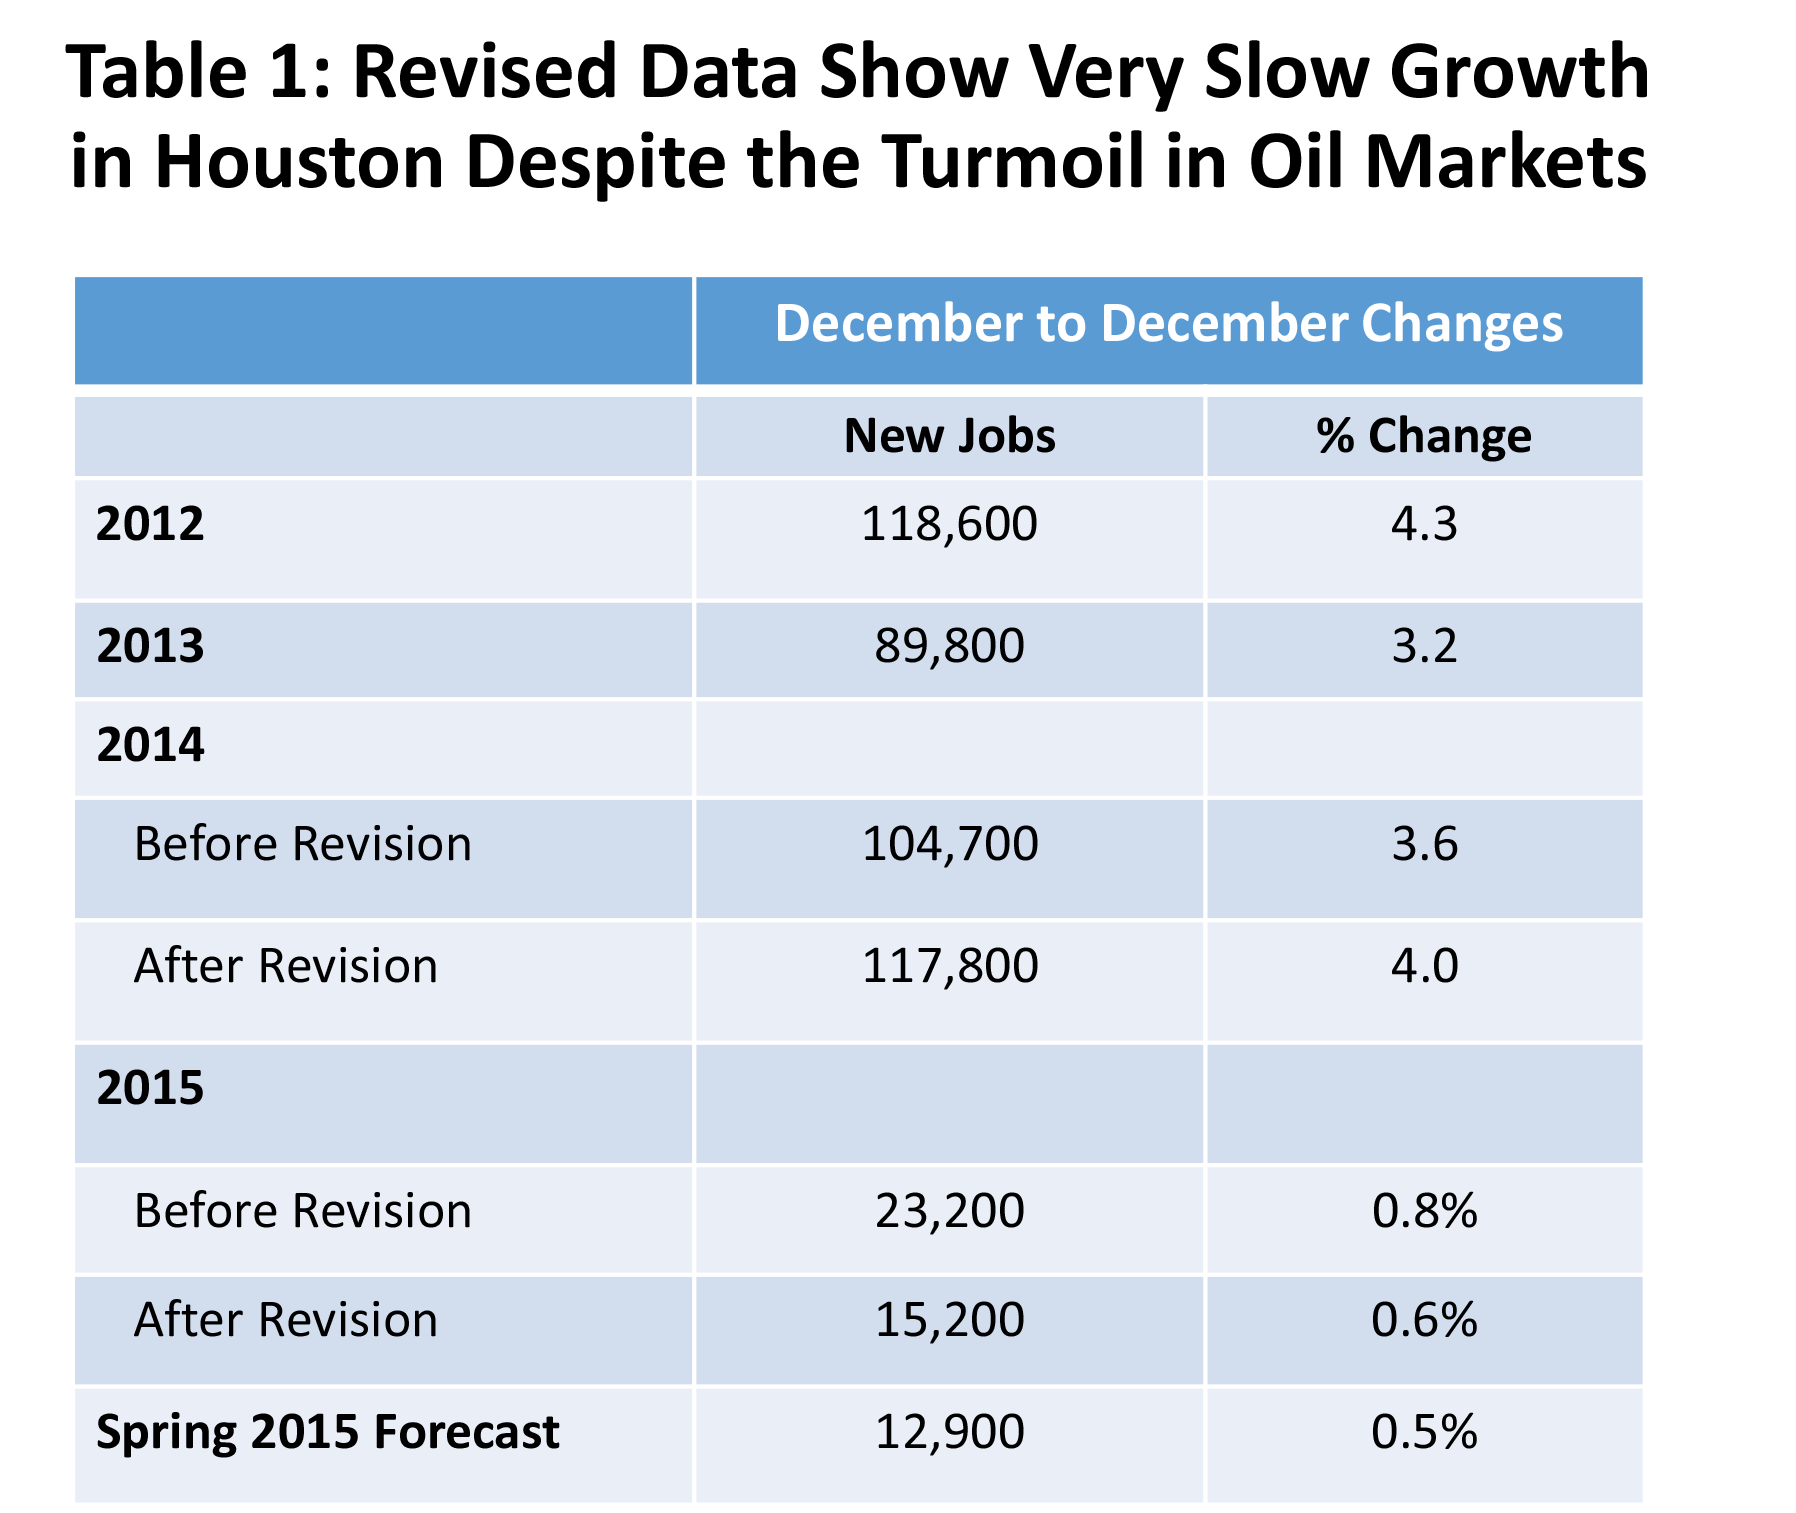 Table 1. Revised Data Show Very Slow Growth in Houston Despite the Turmoil in Oil Markets